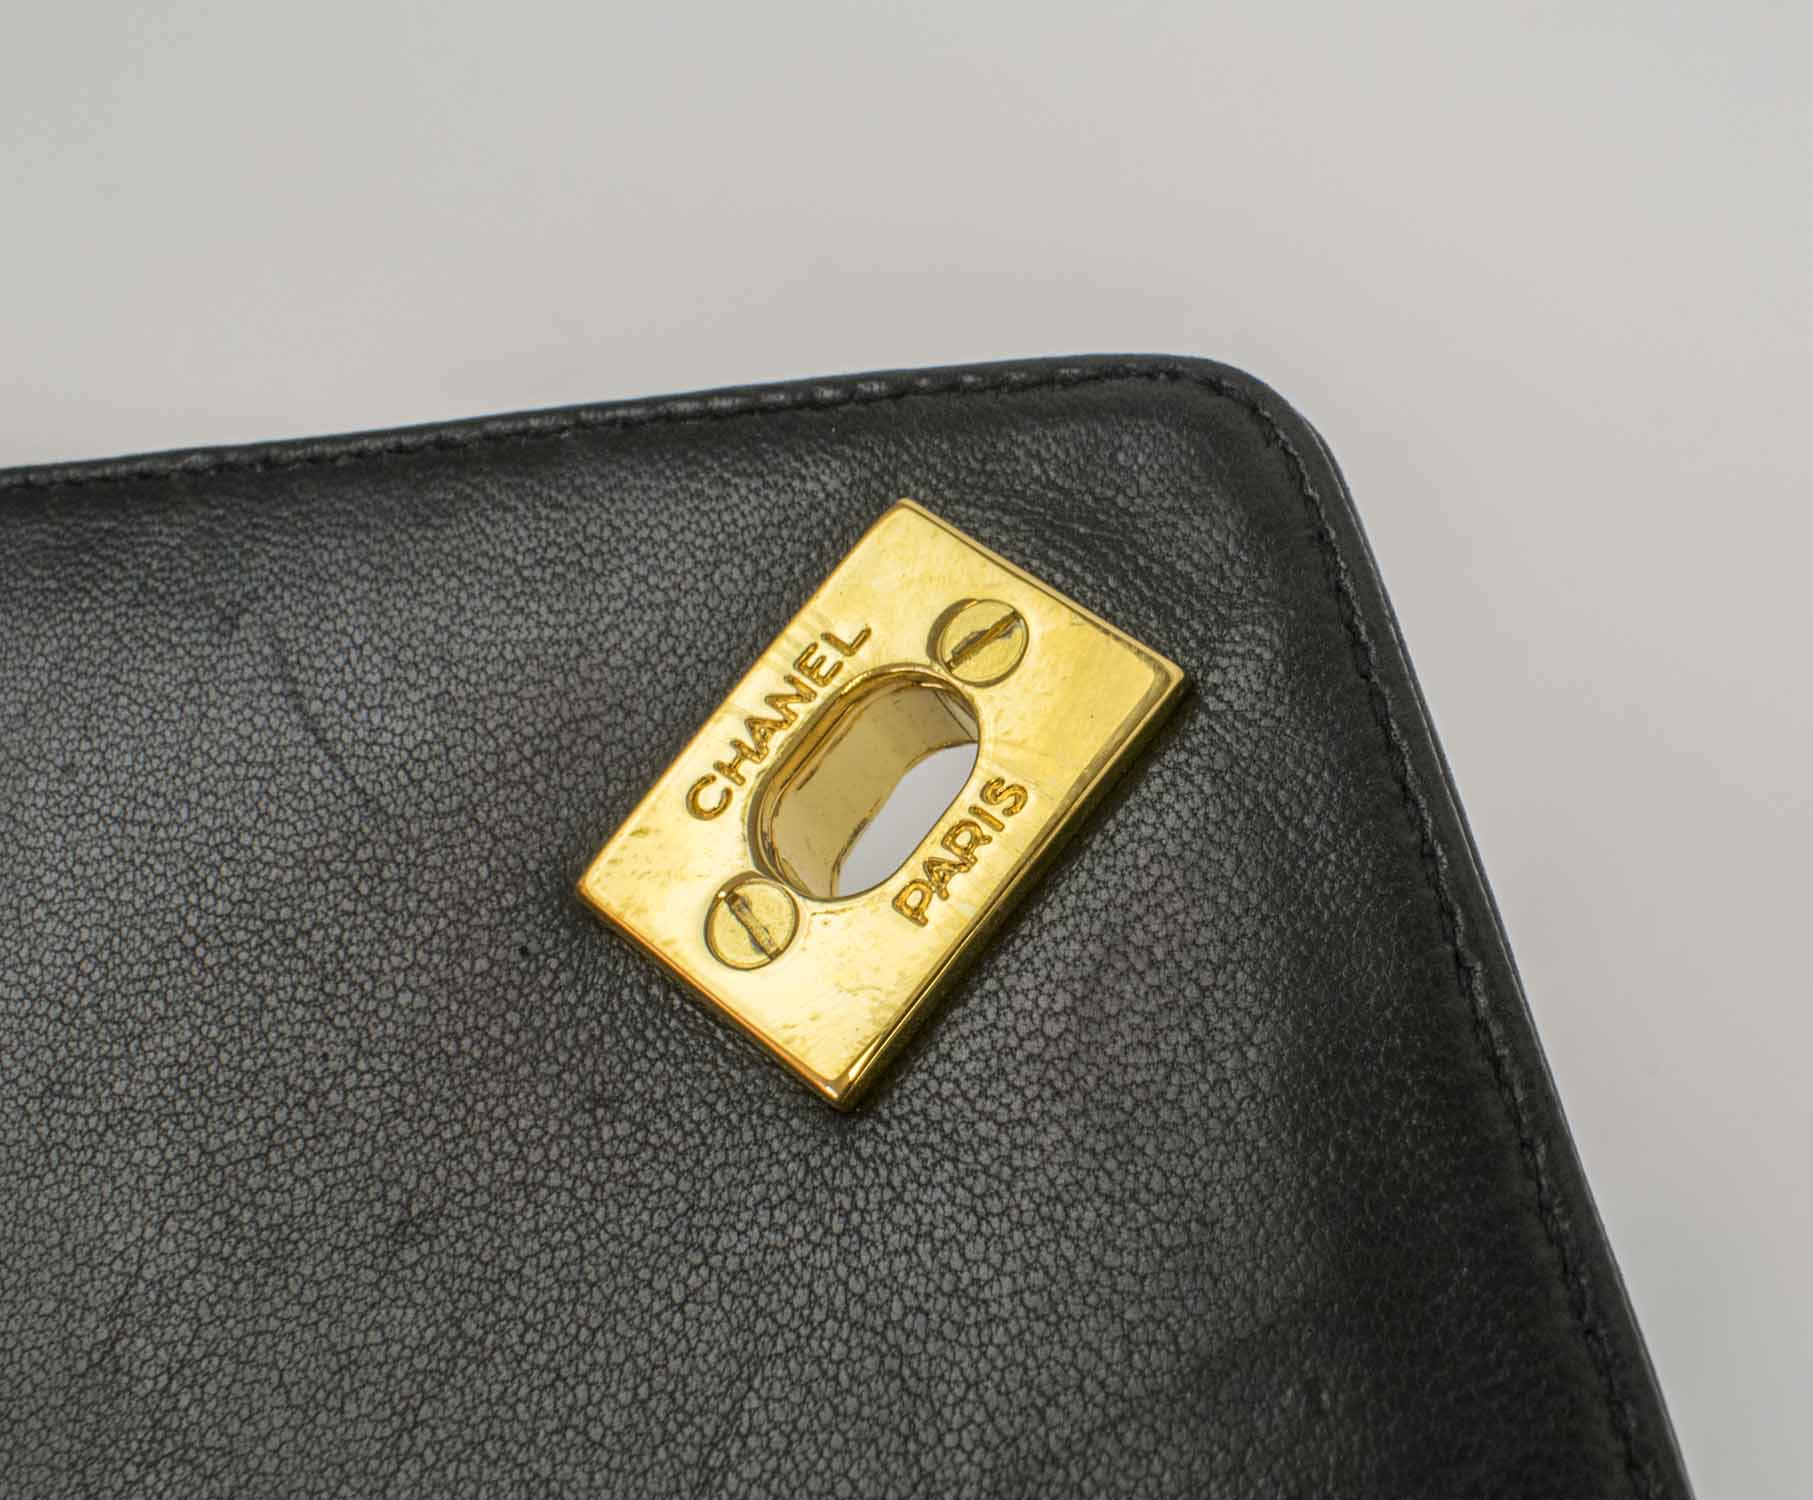 CHANEL CAMERA VINTAGE CHEVRON BAG, with top zip closure with charm pull,  one front pocket with CC turn lock closure, gold tone hardware and strap,  leather lining, authenticity card, c. 1991-1994, with